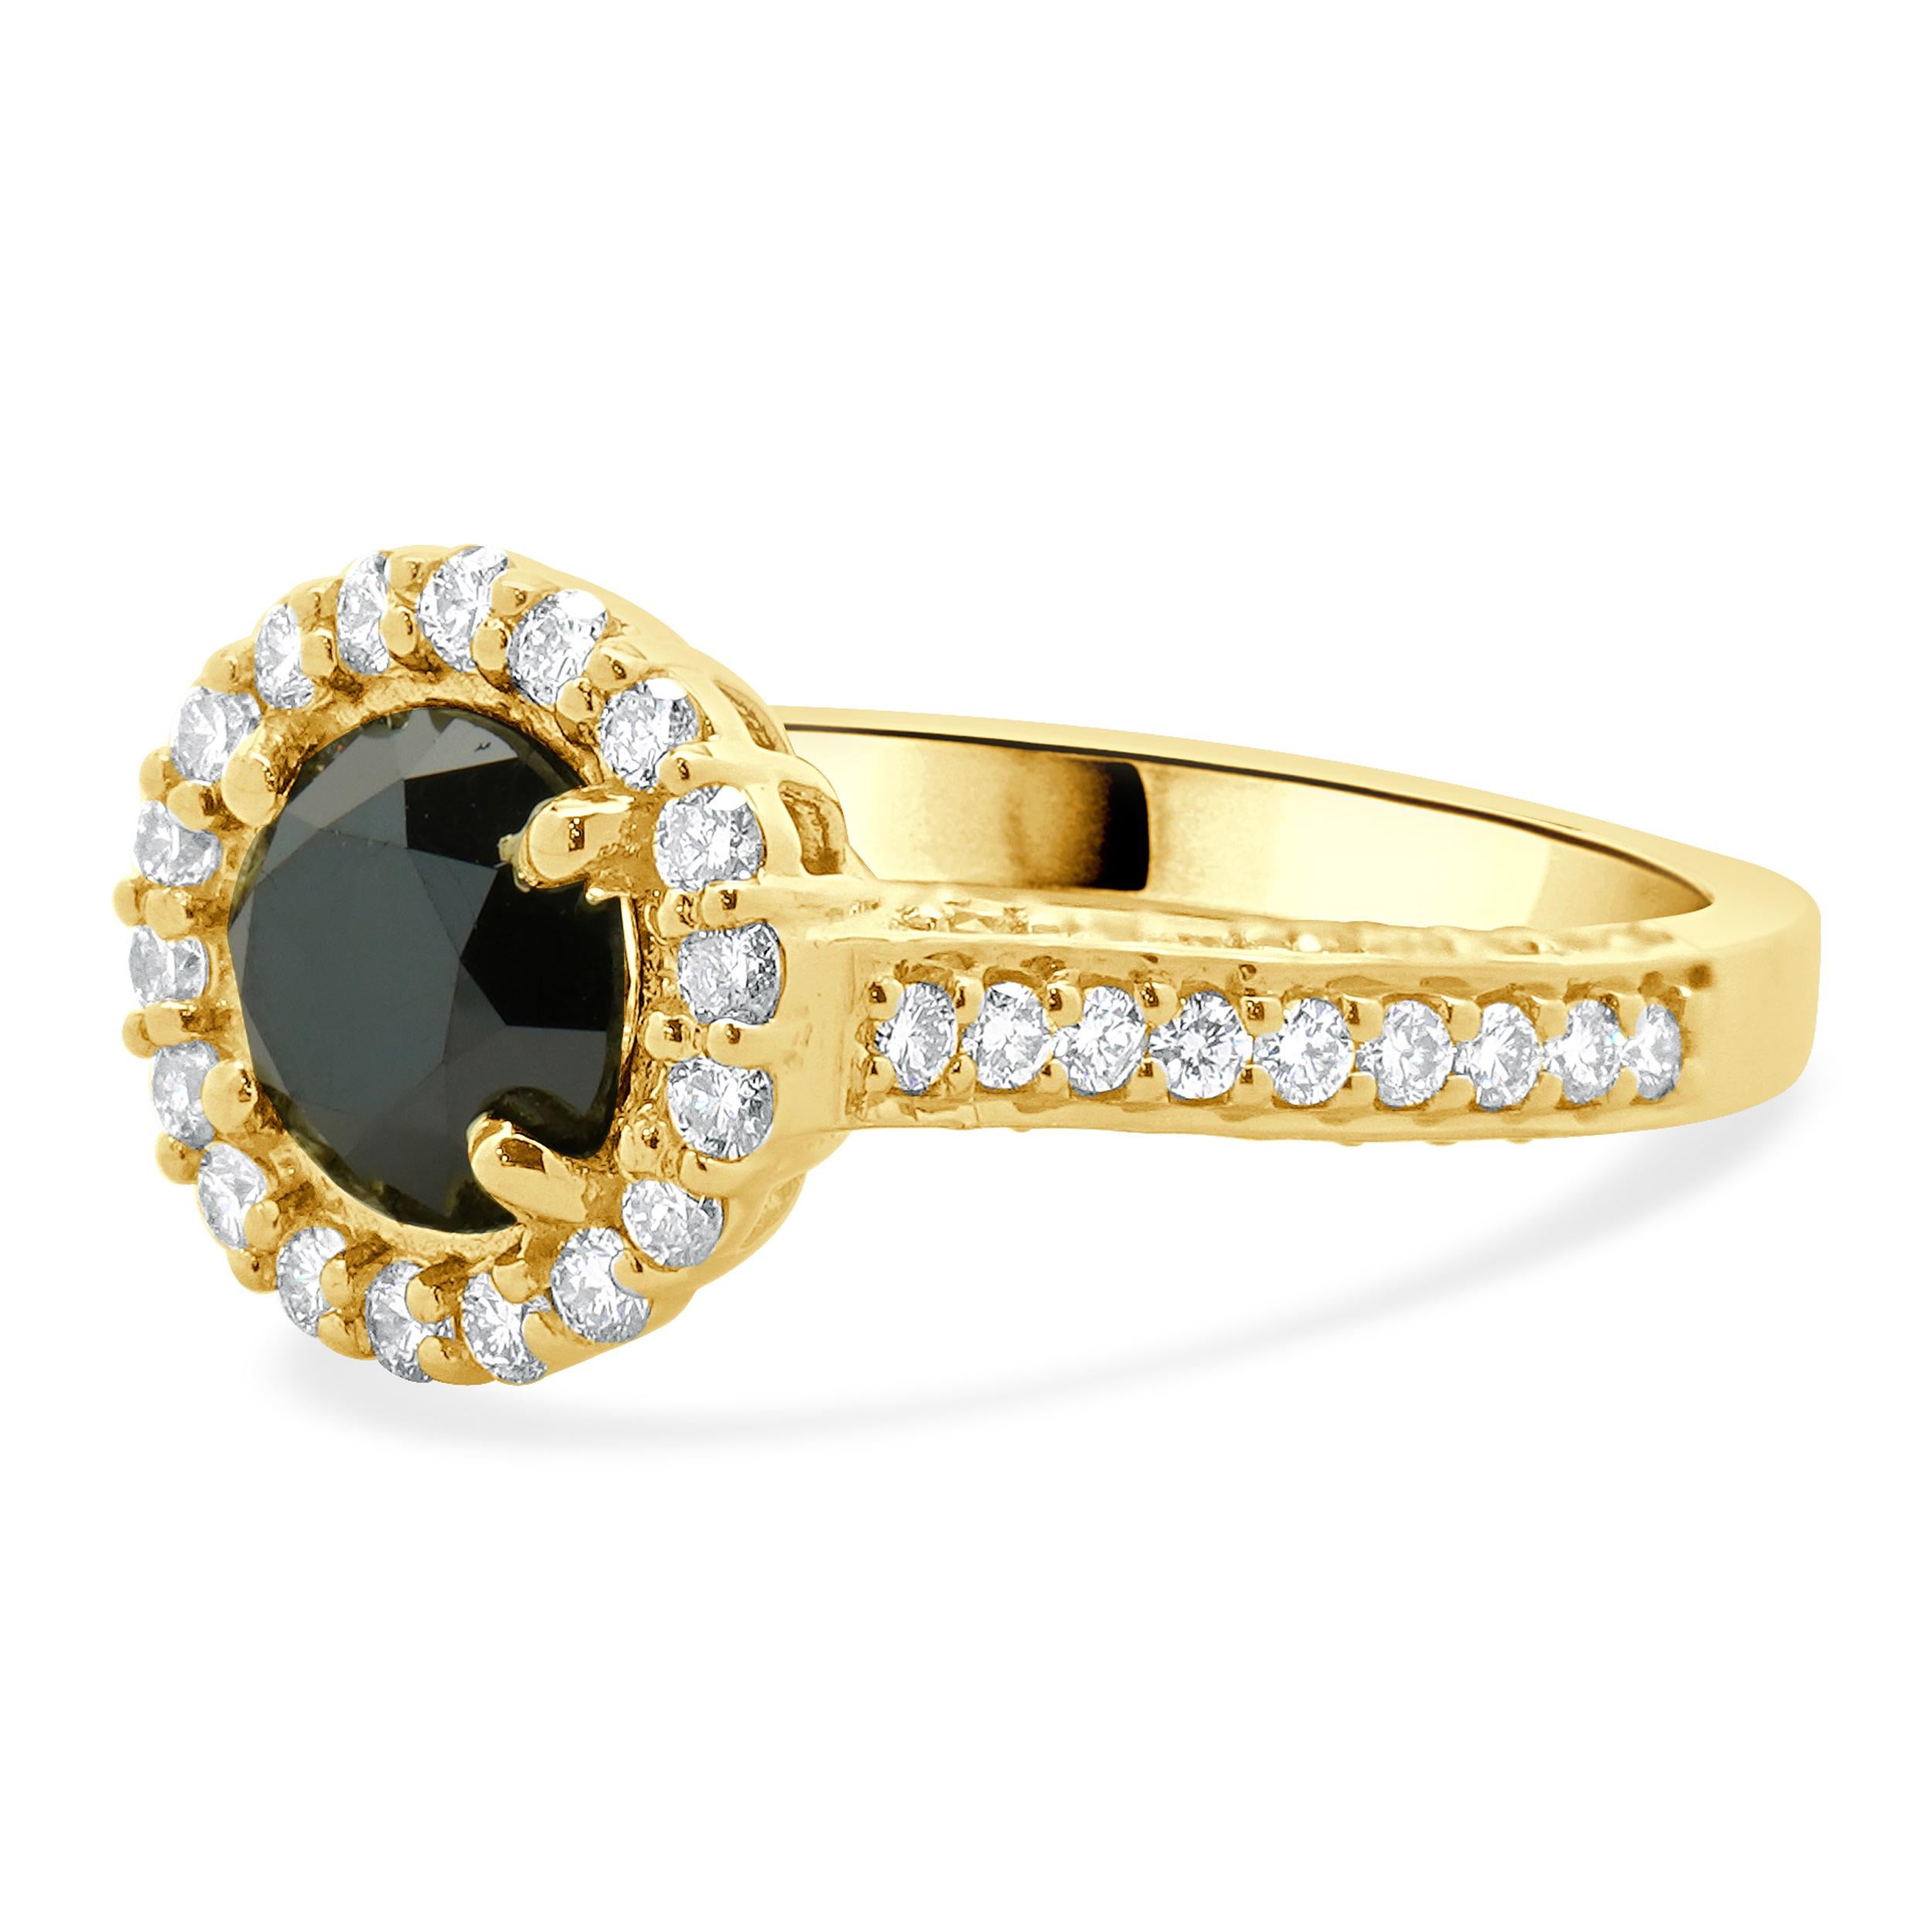 Designer: custom
Material: 18K yellow gold
Diamond: 1 round brilliant cut = 1.25ct
Color: Black
Clarity: SI2
Diamond: 68 round brilliant cut = 0.50cttw
Color: I / J
Clarity: SI1-2
Dimensions: ring top measures 11.50mm wide
Ring Size: 6.5